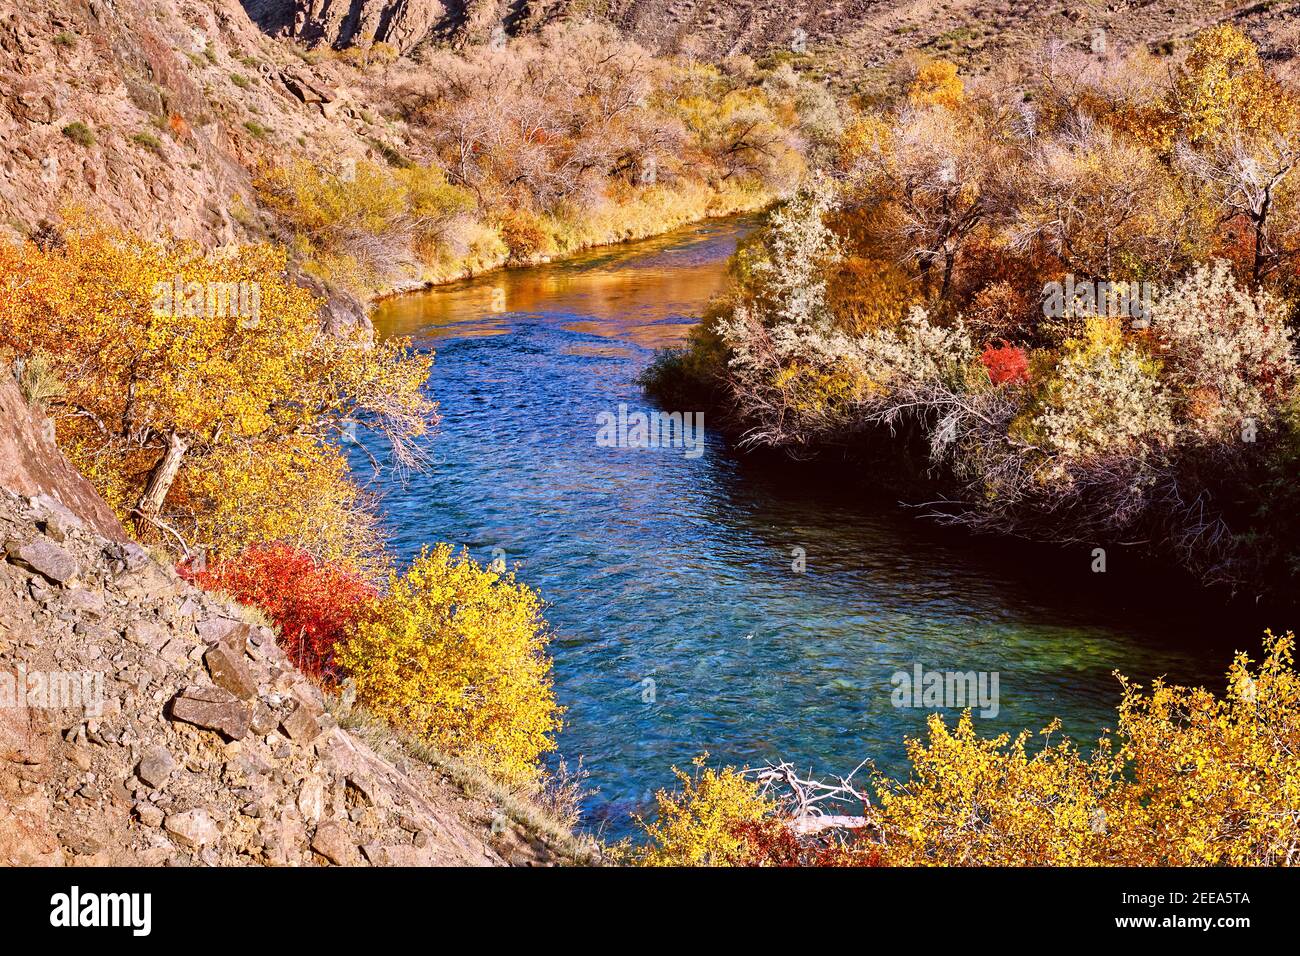 Clear water of rich blue hues surrounded by autumn forest; Charyn river in autumn season Stock Photo